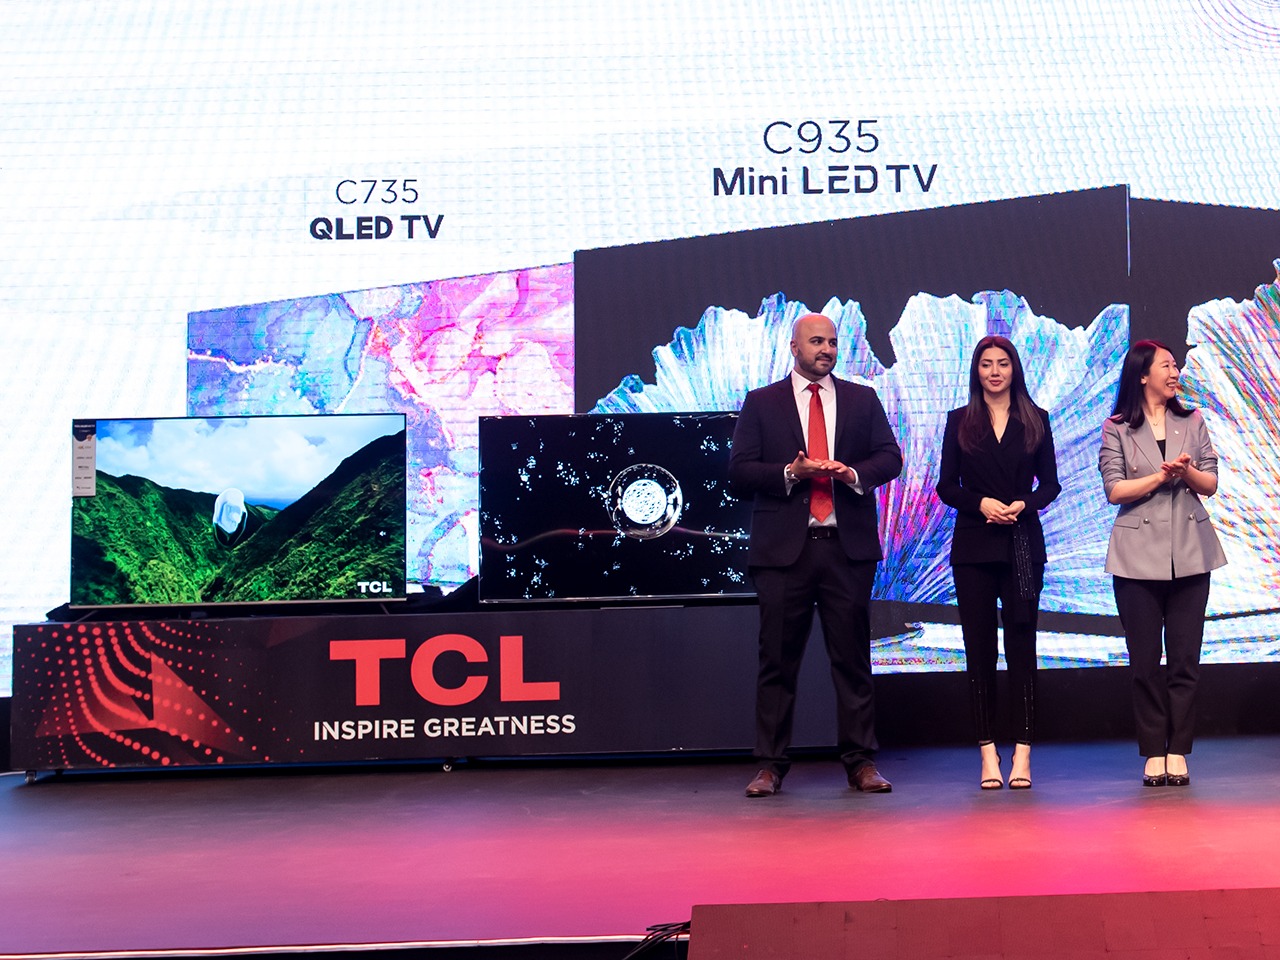 TCL launches the C-Series of LED TVs, the latest series of Premium Mini LED TVs and QLED TVs in Pakistan with groundbreaking technology